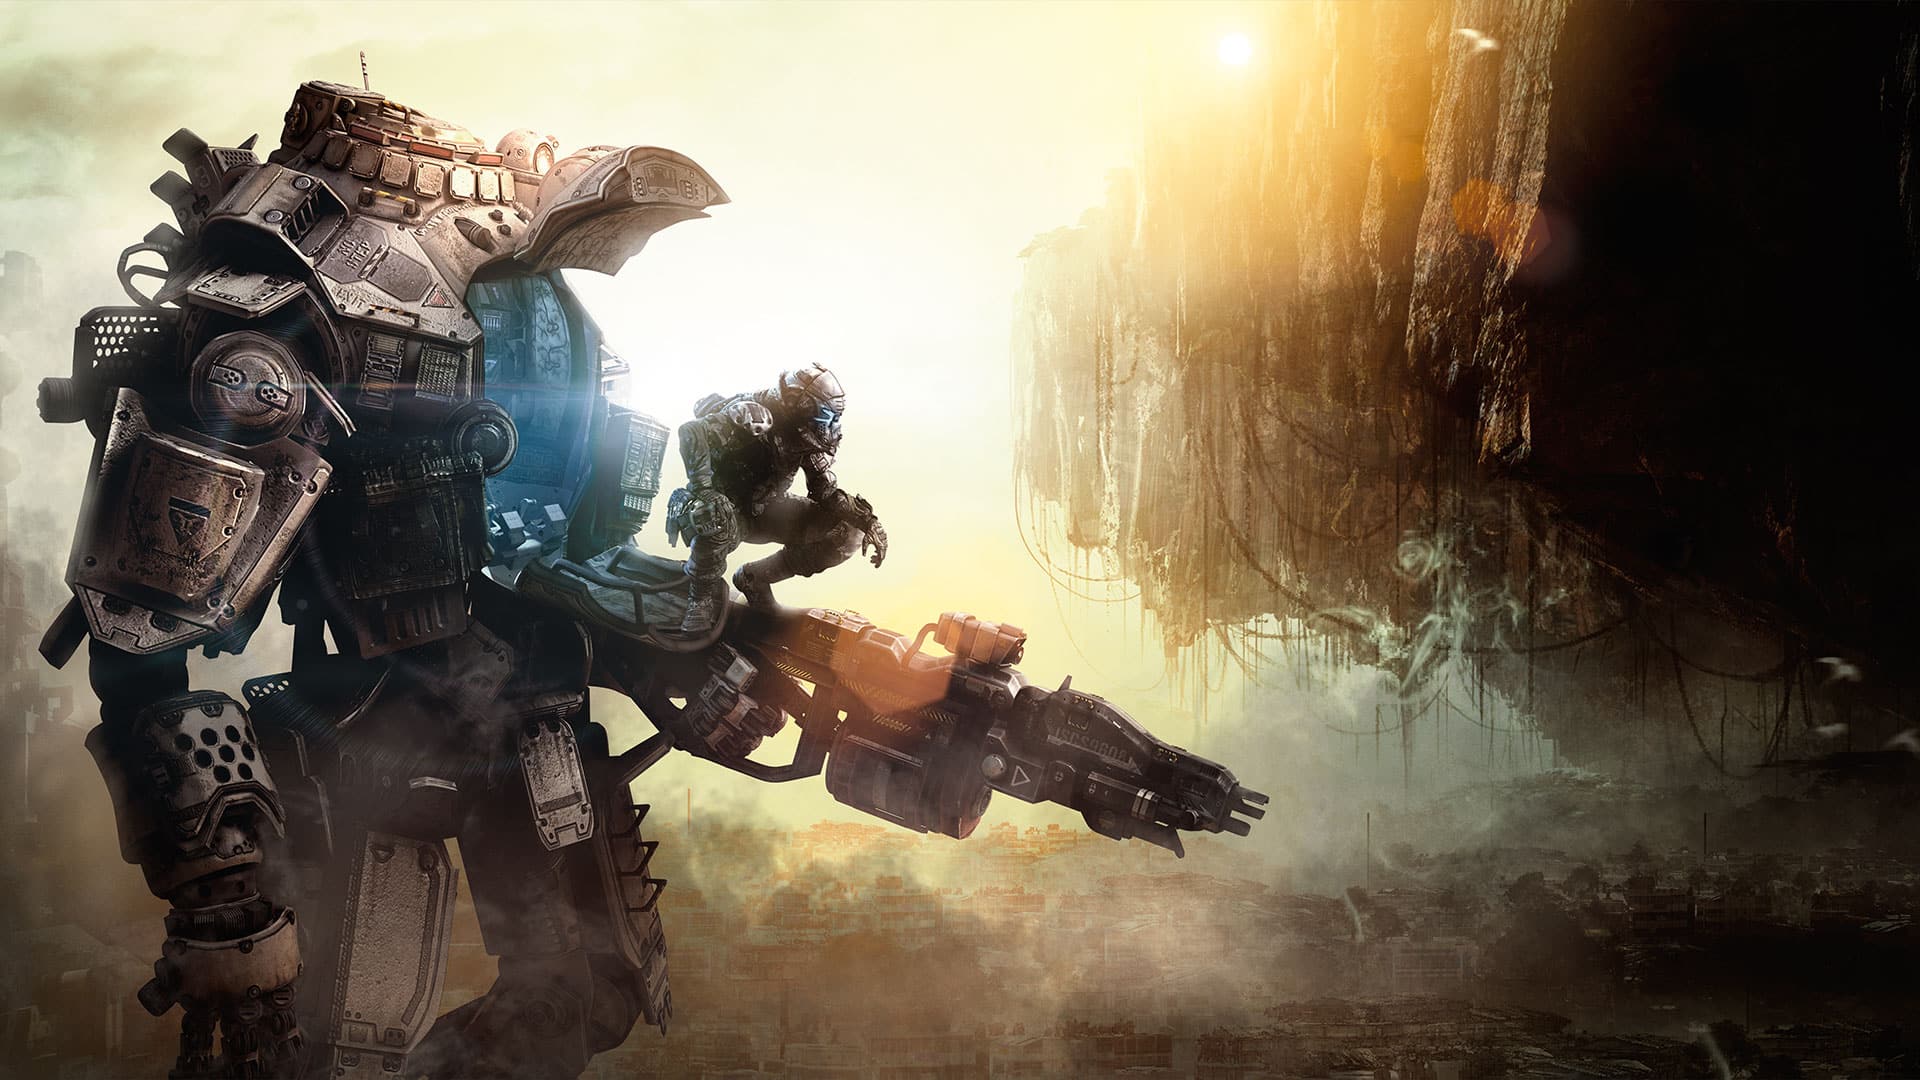 Read more about the article ‘Titanfall’ For Xbox One May Redefine First-Person Shooter Games